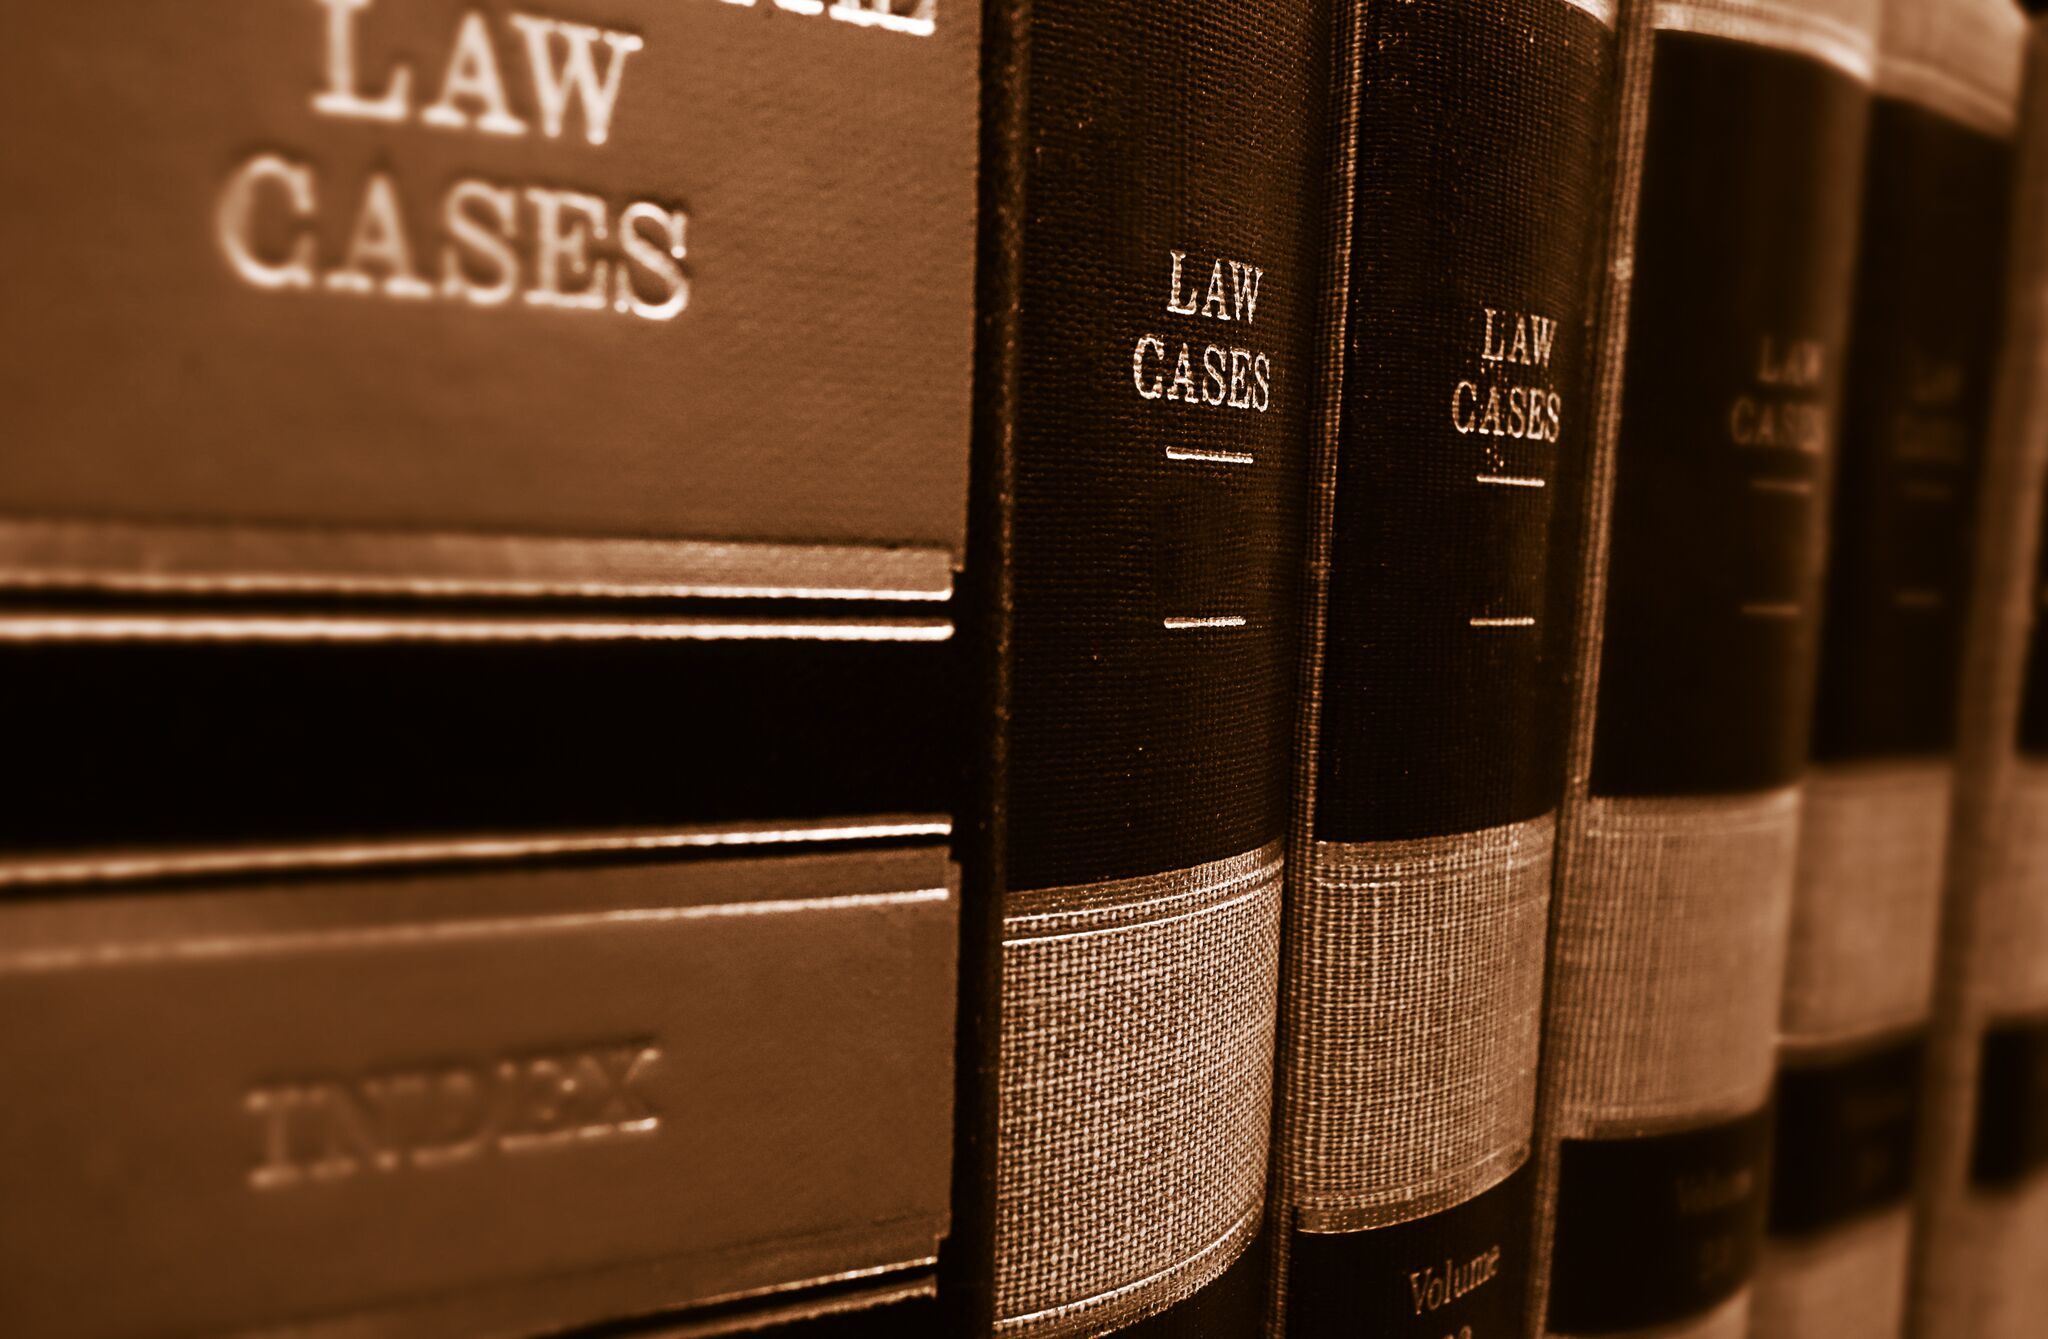 Picture of books about law cases